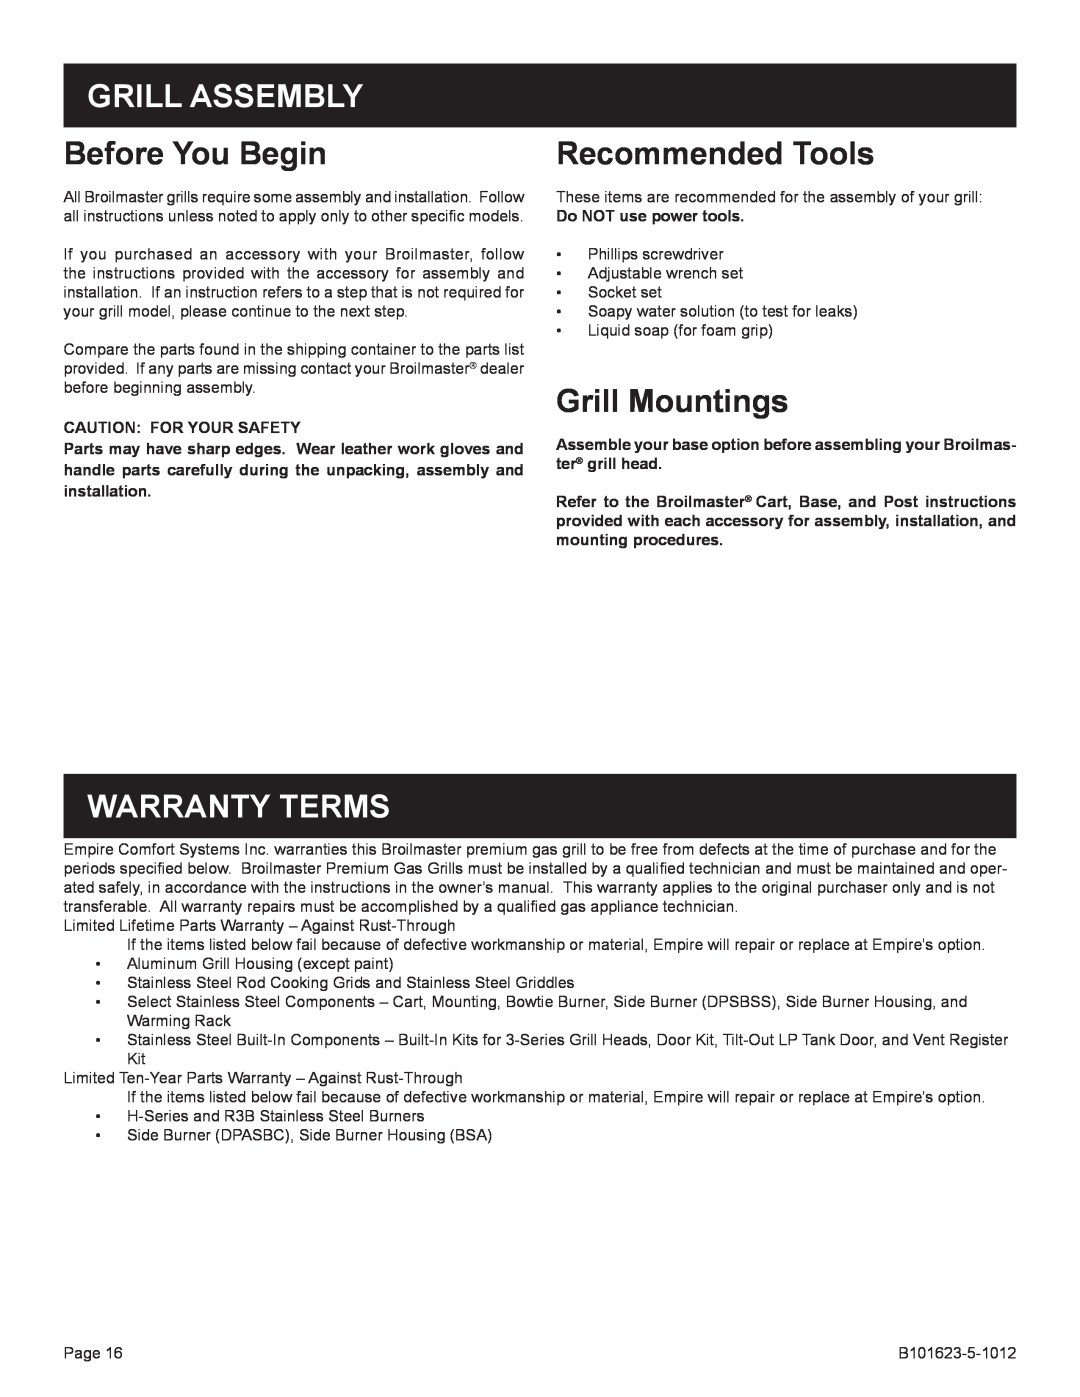 Broilmaster R3-1, P4XFN-1 manual Grill Assembly, Before You Begin, Recommended Tools, Grill Mountings, Warranty Terms 